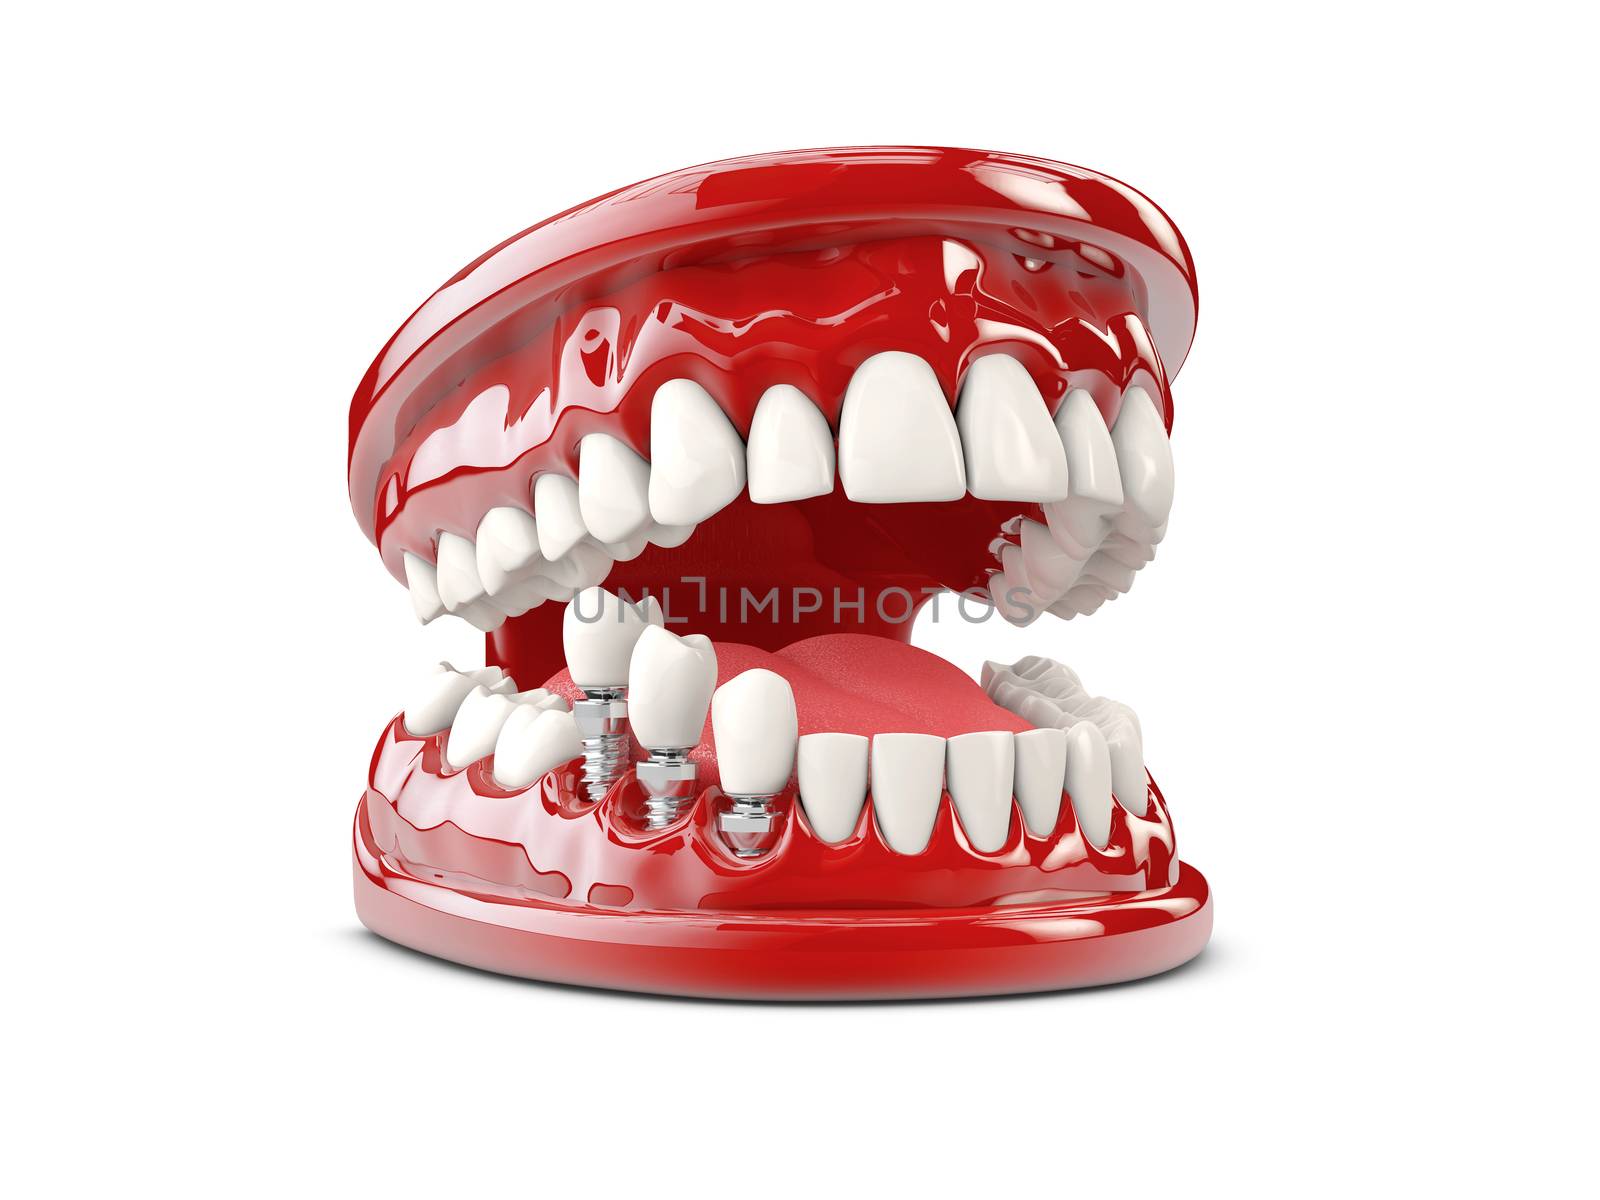 Tooth human implant. Dental concept 3d illustration by tussik